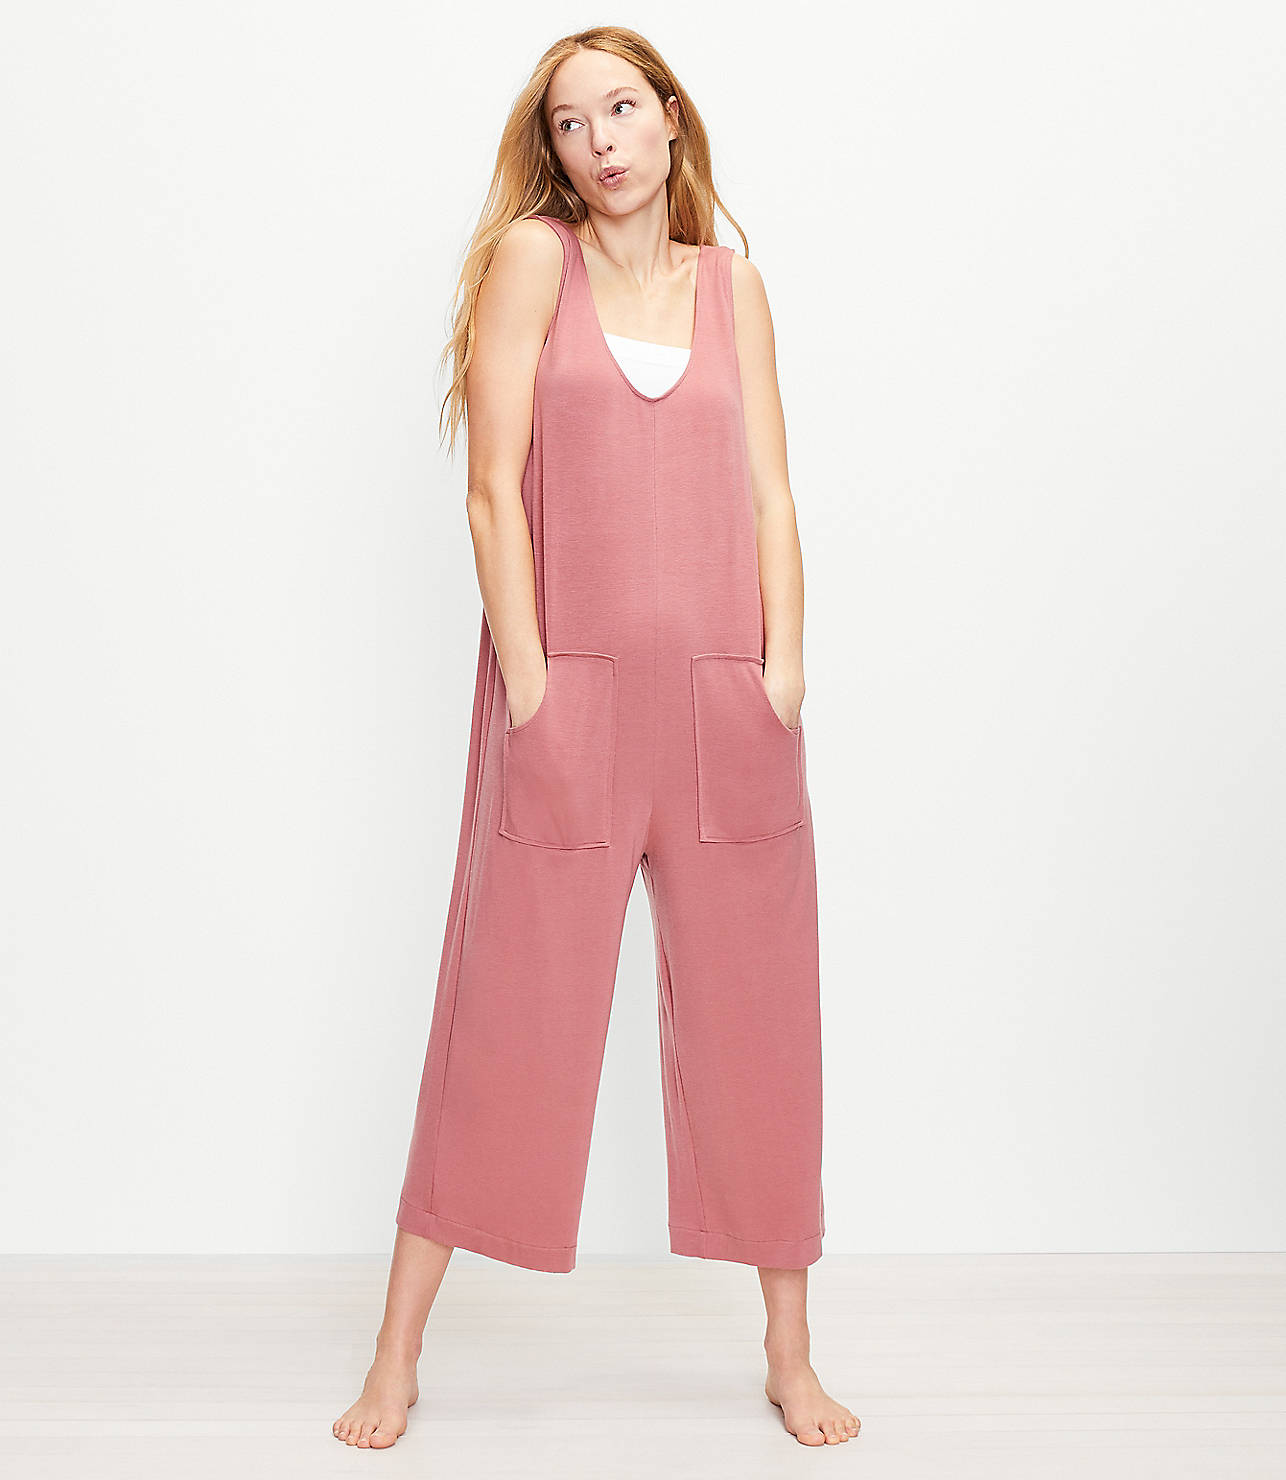 Luxe Knit Pocket Pajama Romper